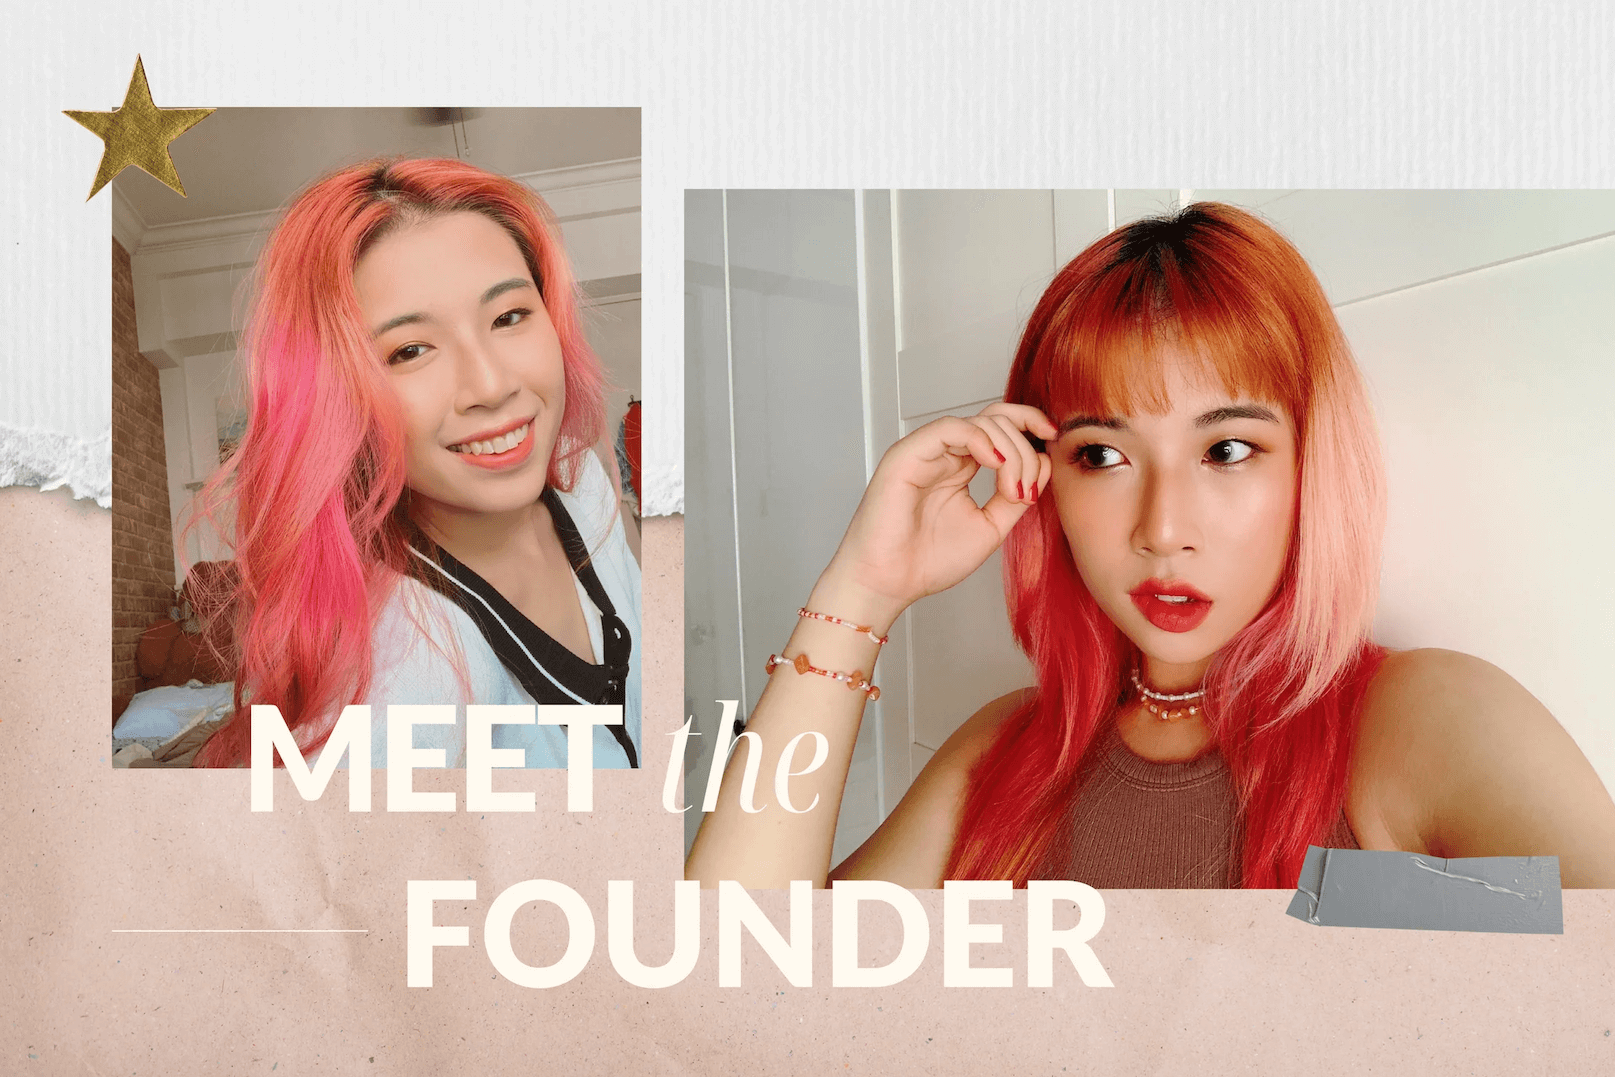 Storytelling Brand–QWERKY’s Meet the Founder page of its website shows two photos of its founder, Koh Qi Wen. She has neon pink hair in one image and ombre red and orange hair in the other. 